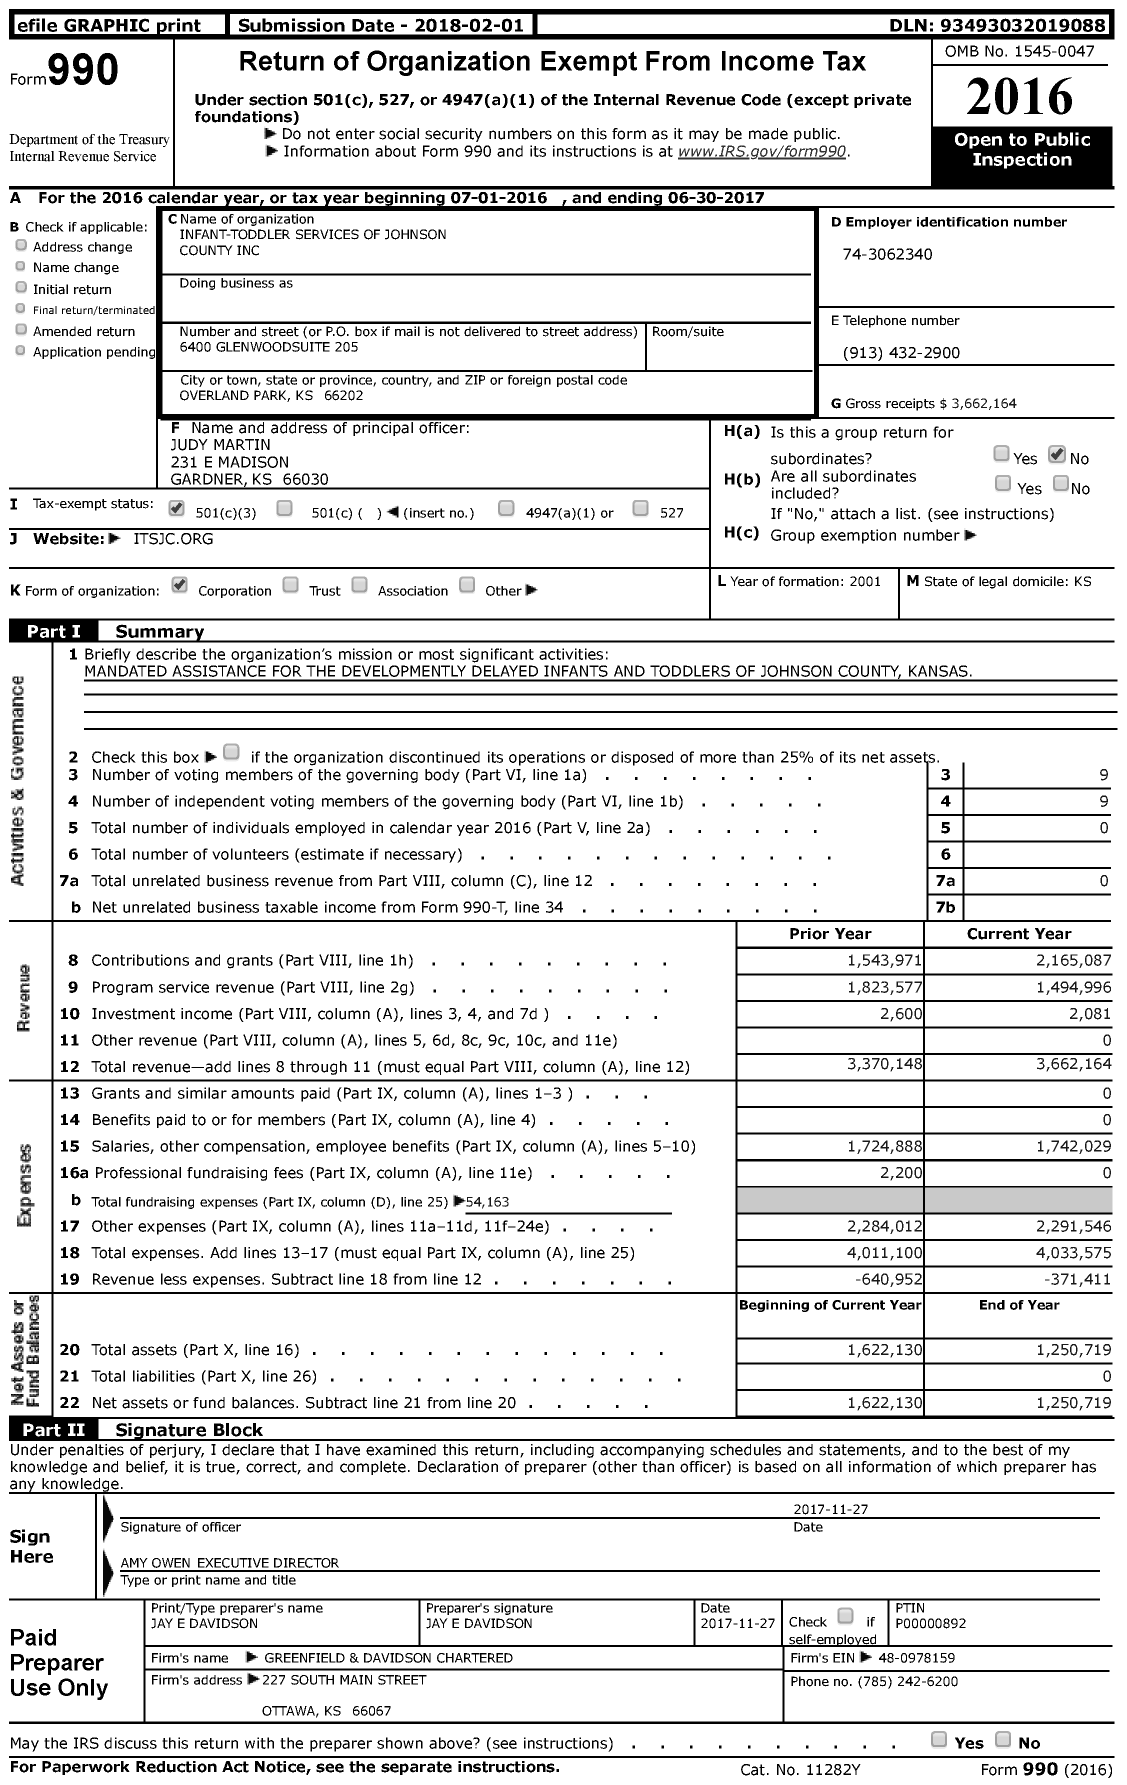 Image of first page of 2016 Form 990 for Infant-Toddler Services of Johnson County